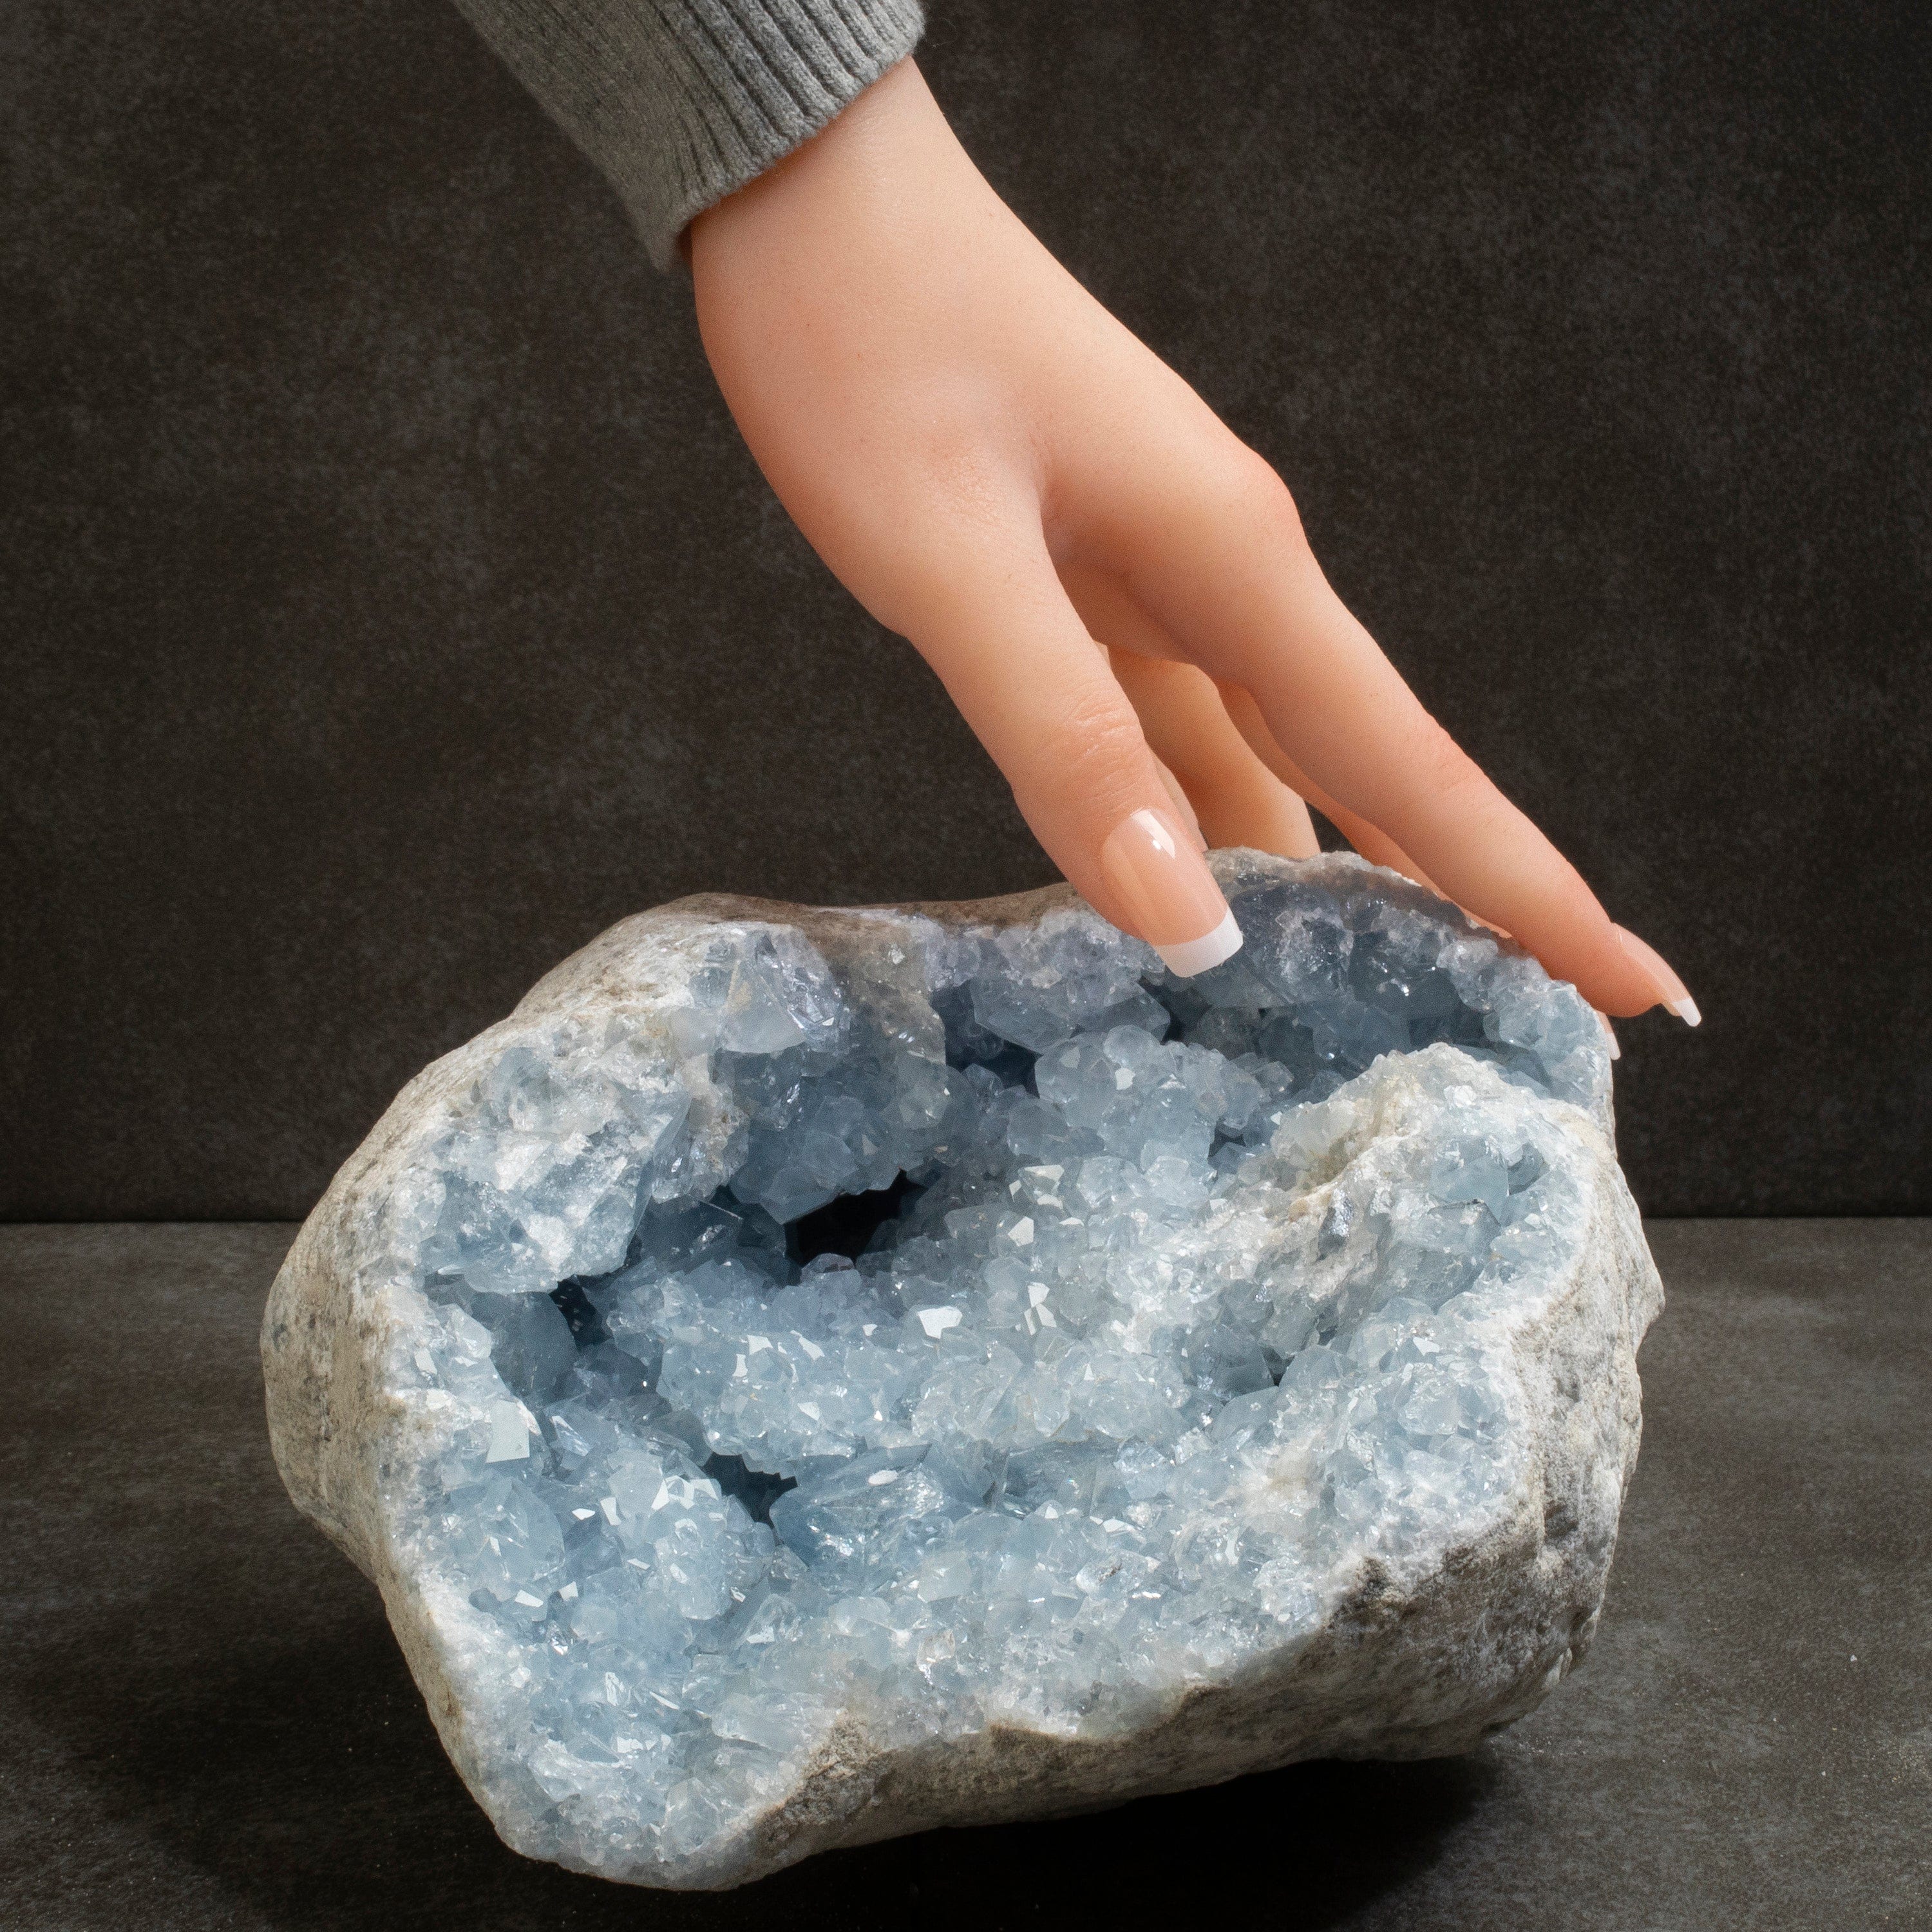 Kalifano Celestite Natural Celestite Crystal Cluster Geode from Madagascar - 7 in. CG1700.001